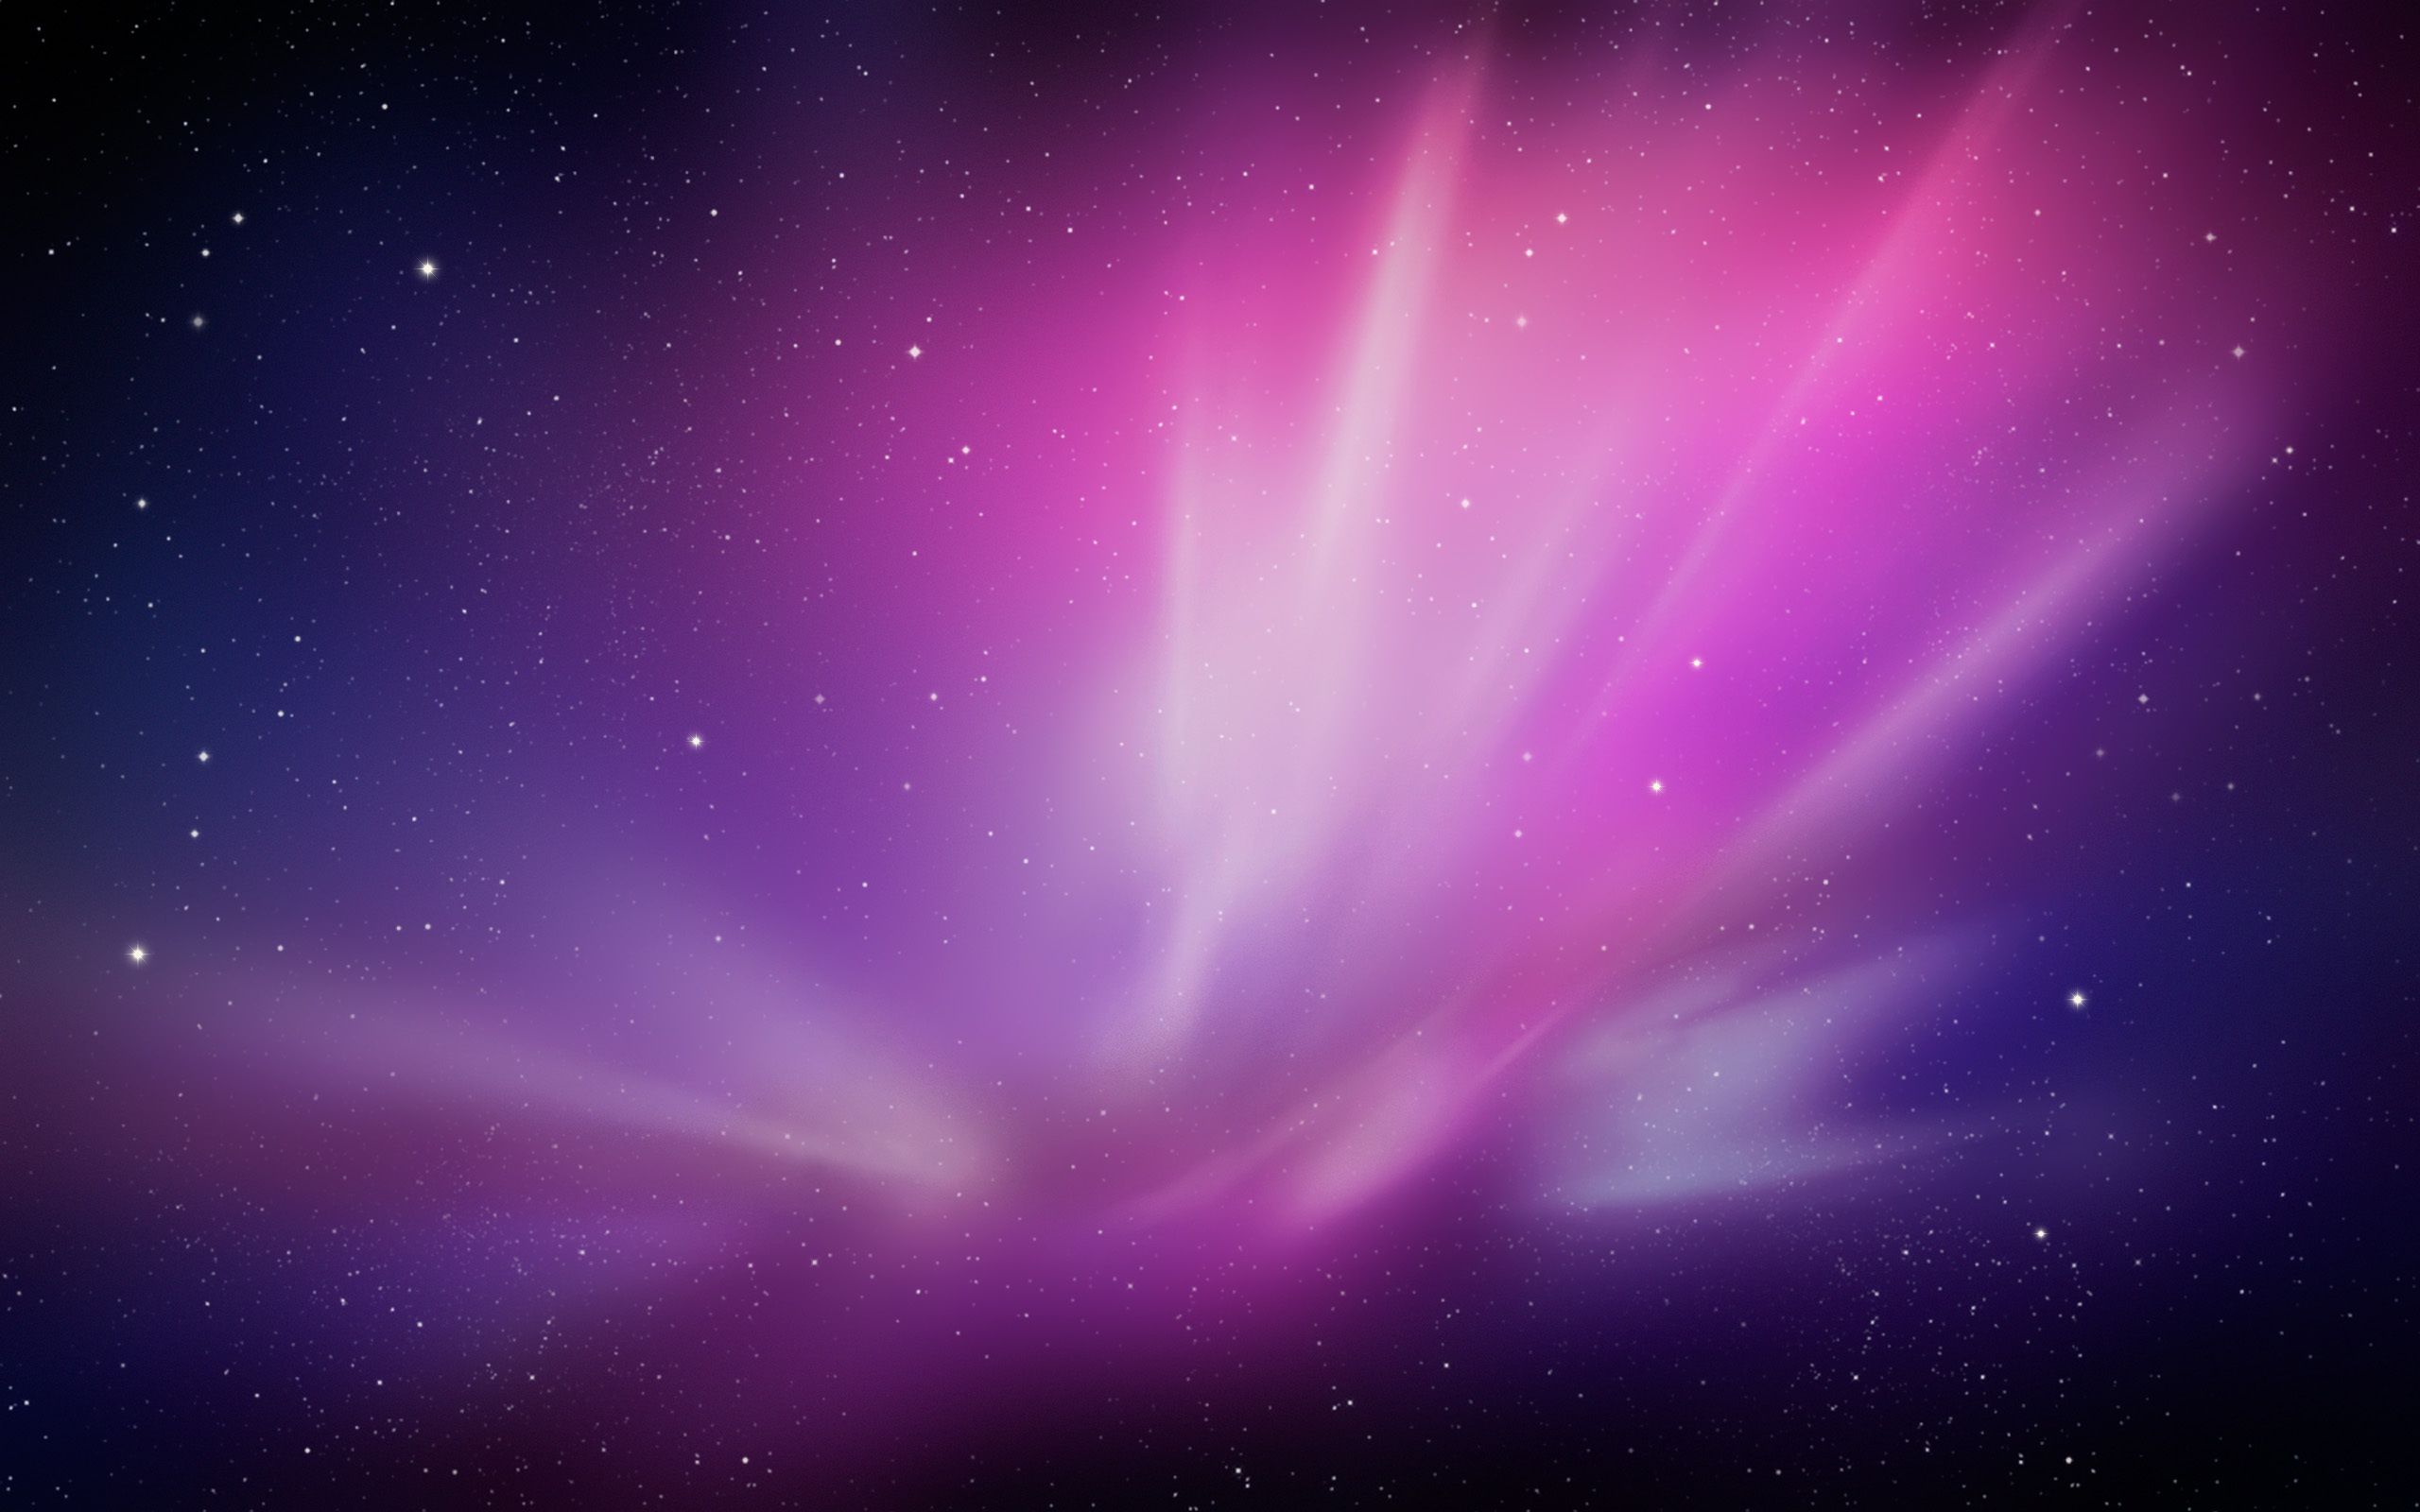 HD purple wallpaper image to use as background 14